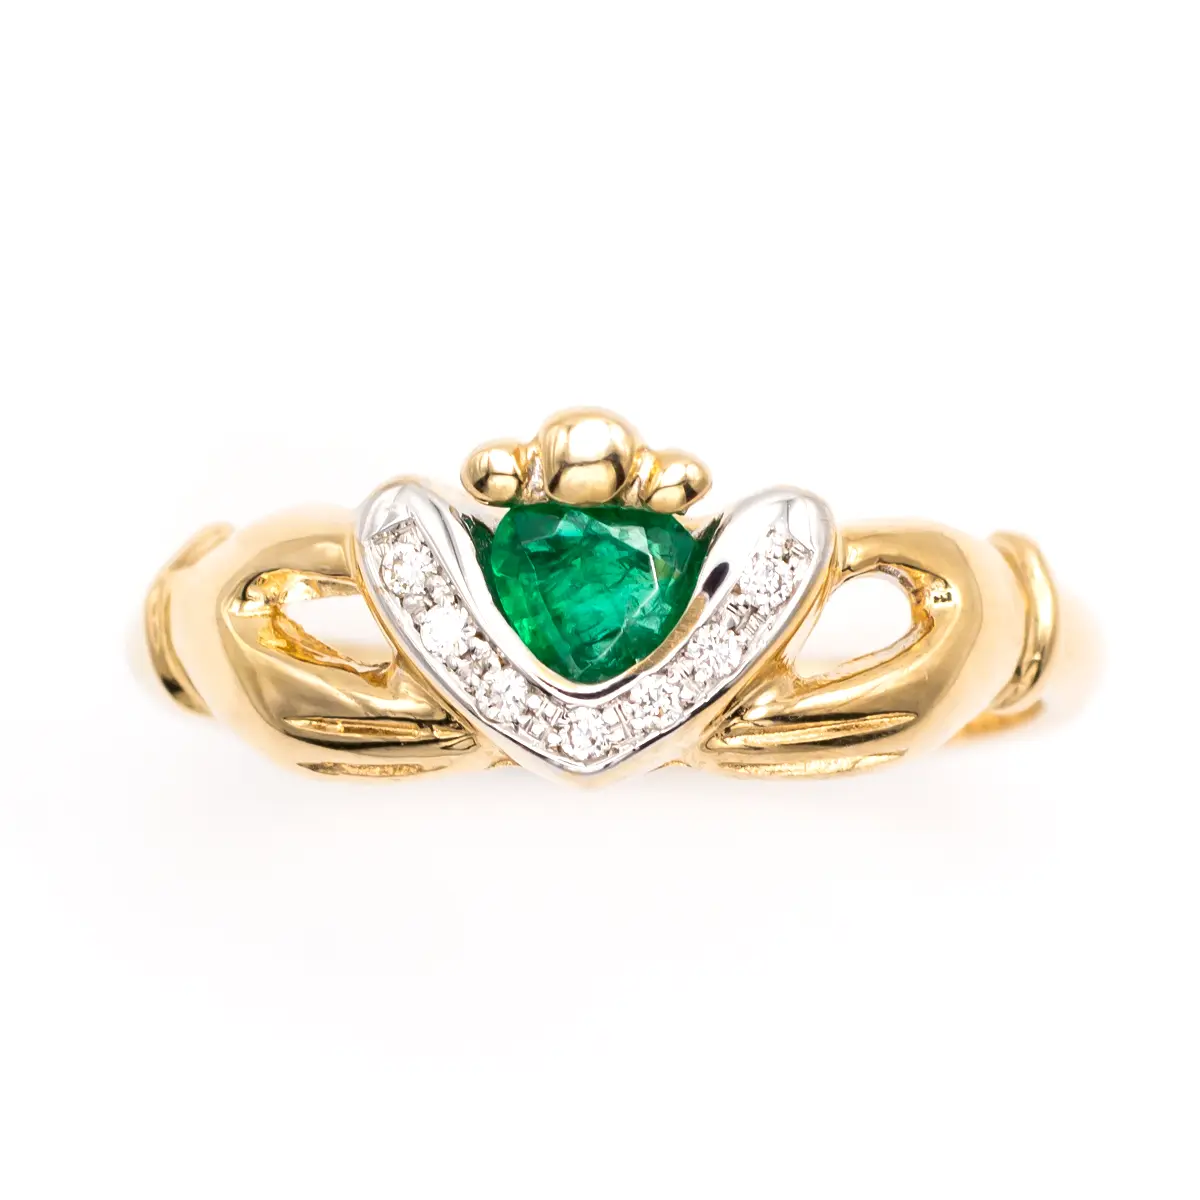 Ladies 14k Gold Claddagh Ring with Emerald and Diamonds...